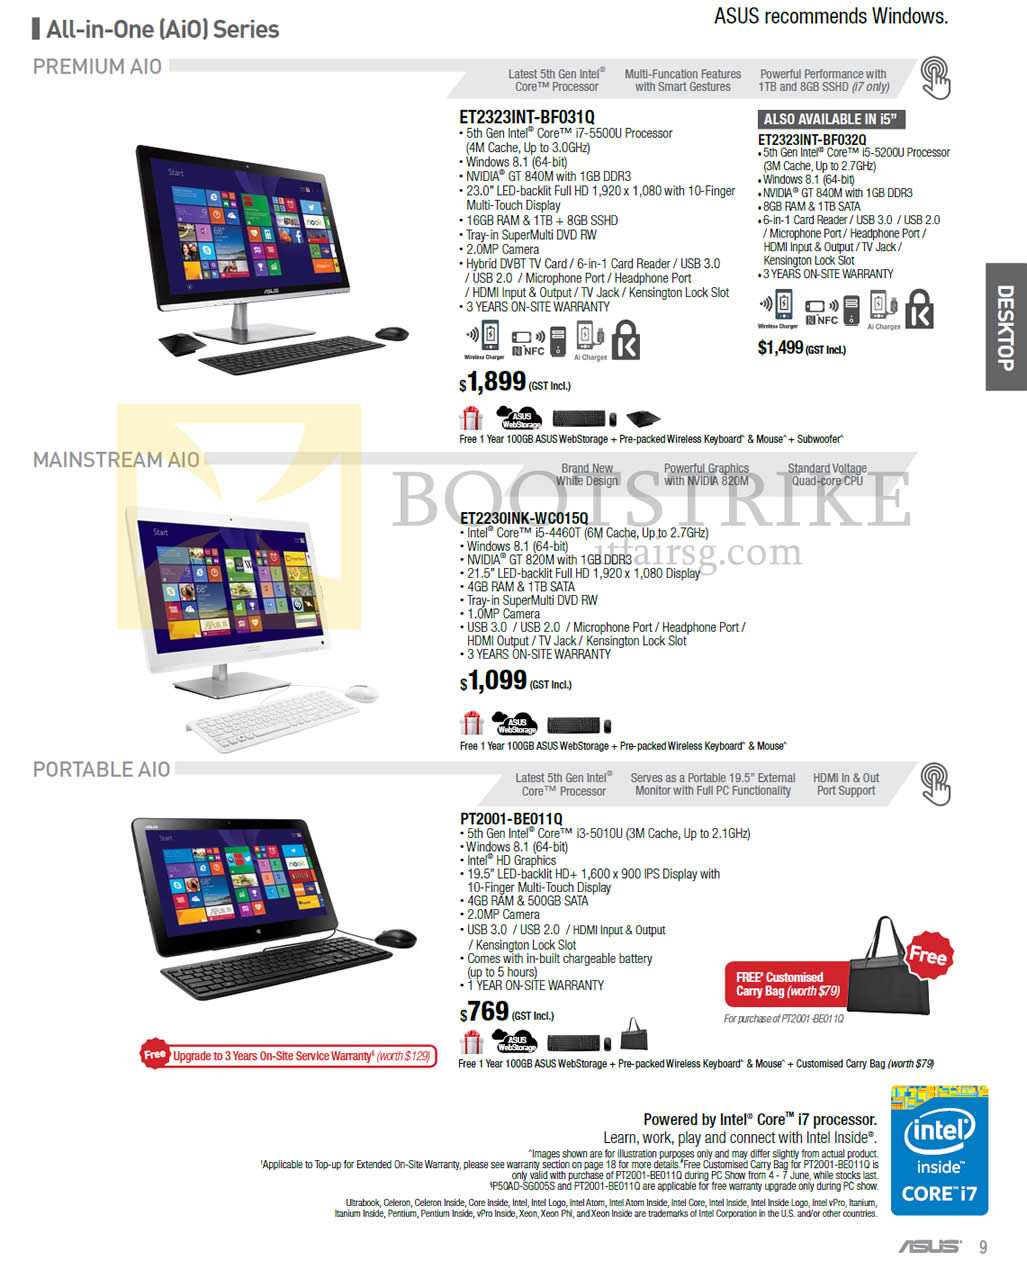 PC SHOW 2015 price list image brochure of ASUS AIO Desktop PC ET2323INT-BF031Q, ET2323INT-BF032Q, ET2230INK-WC015Q, PT2001-BE011Q